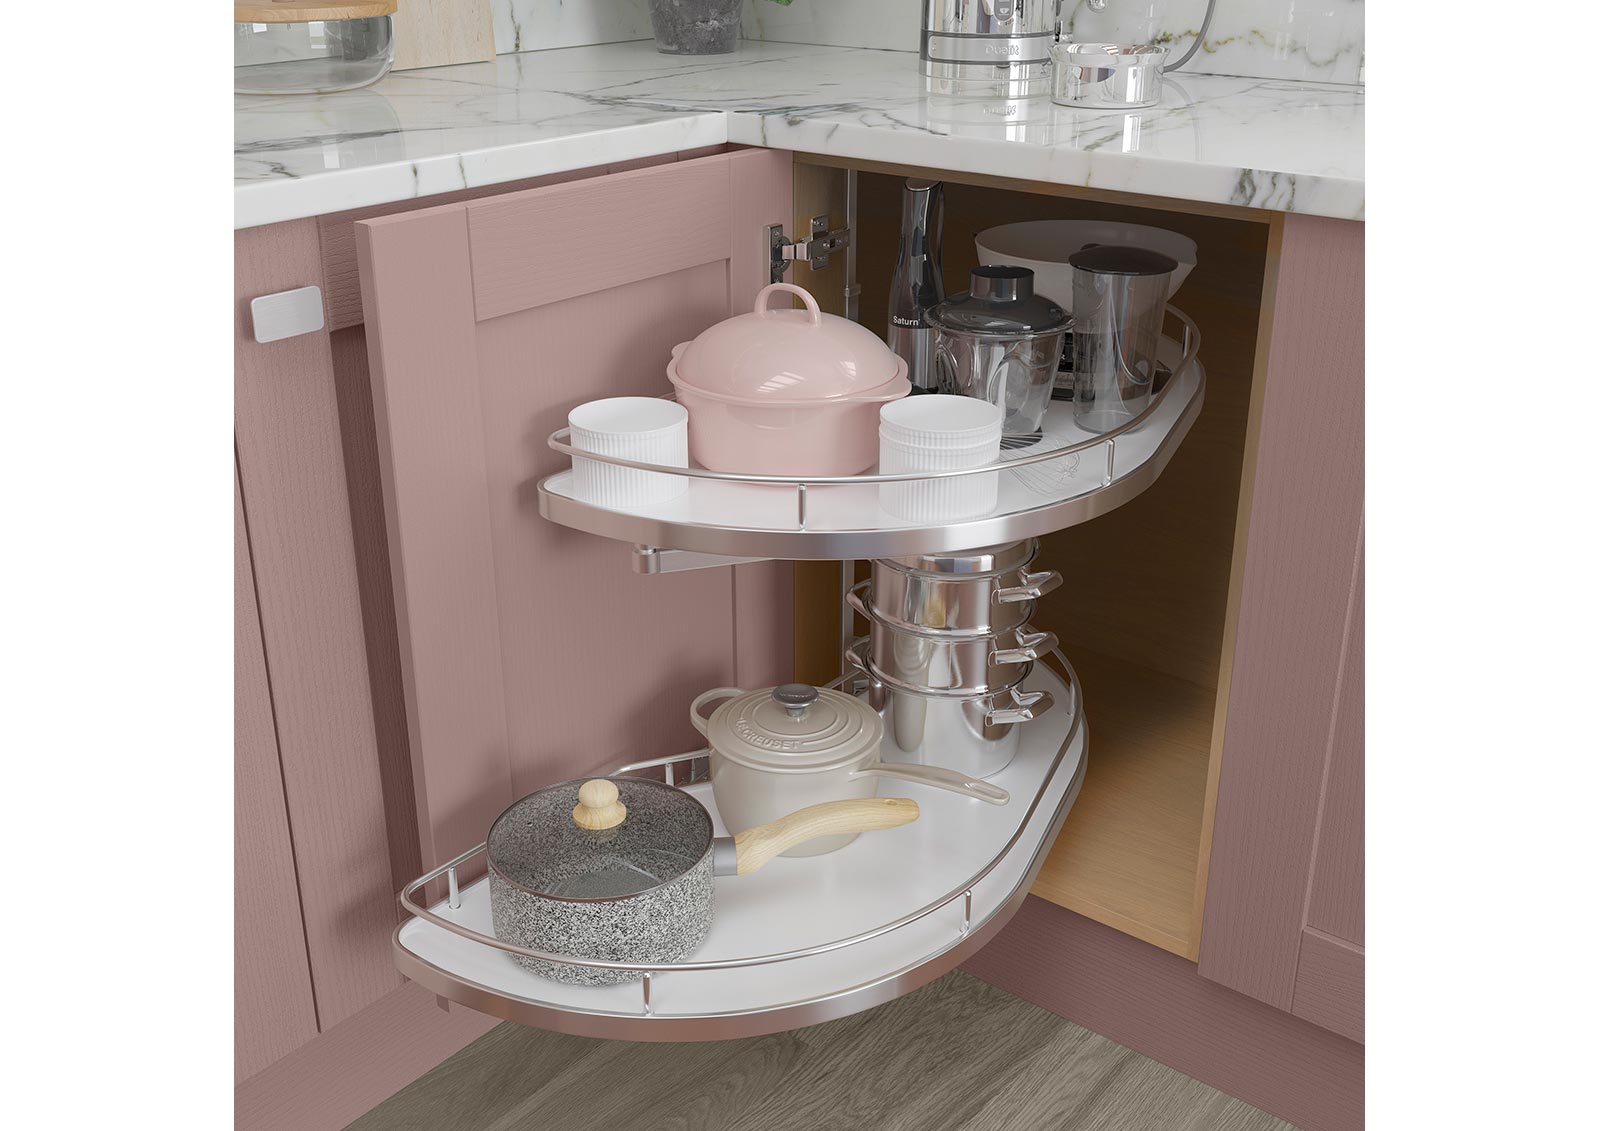 classic shaker kitchen incorporating corner pull-out